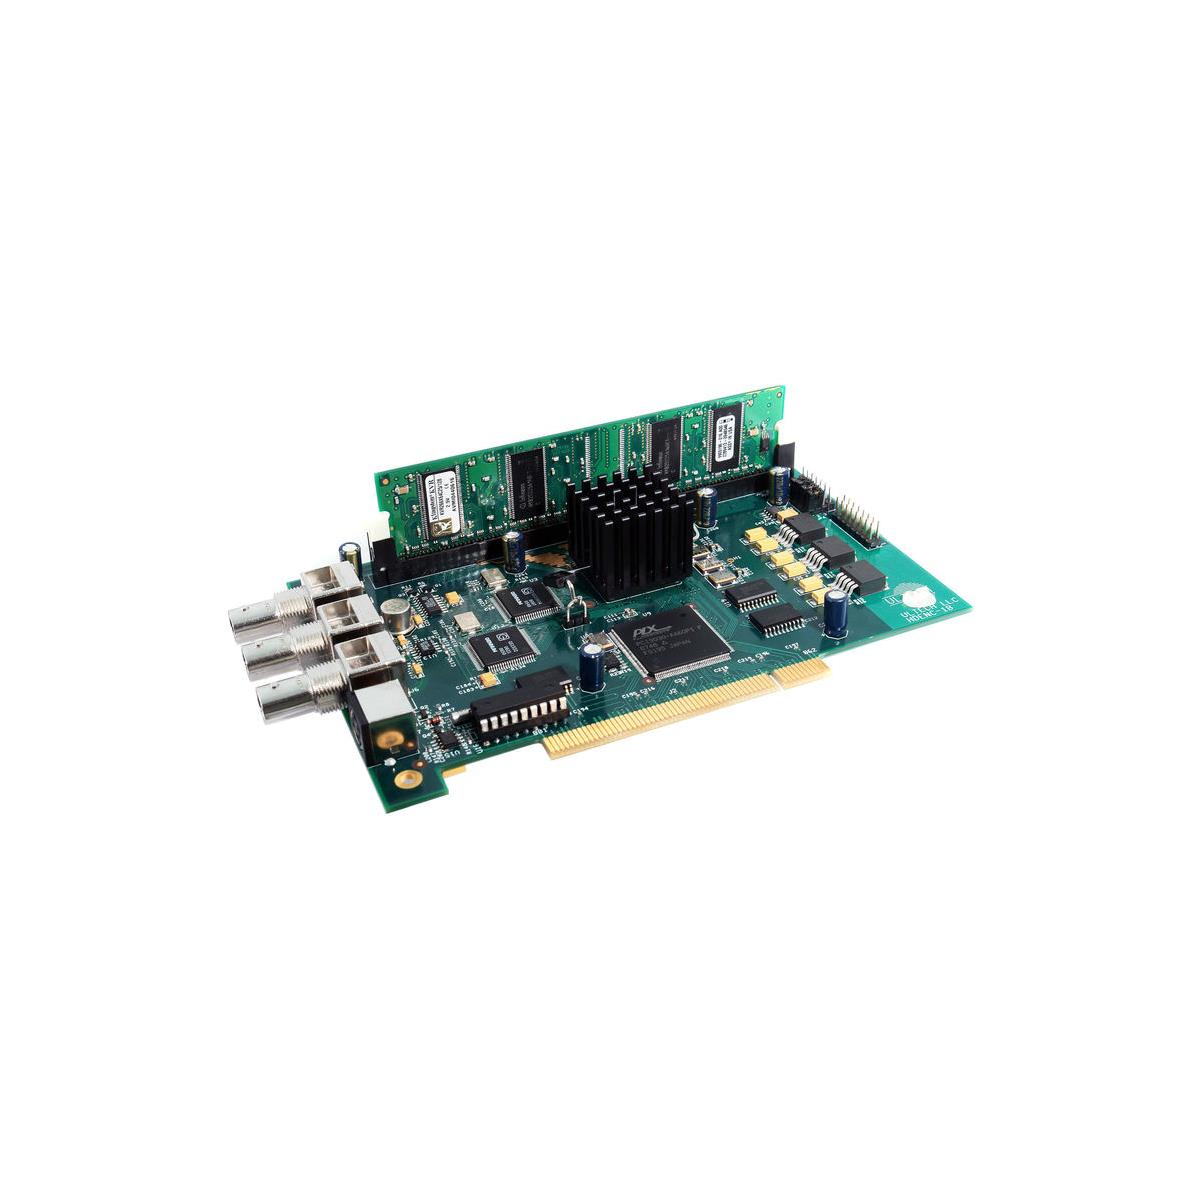 Image of Link Electronics Dual Ch Upgrade for HDE-3000 Encoder to HDE-3000/2 Dual Encoder